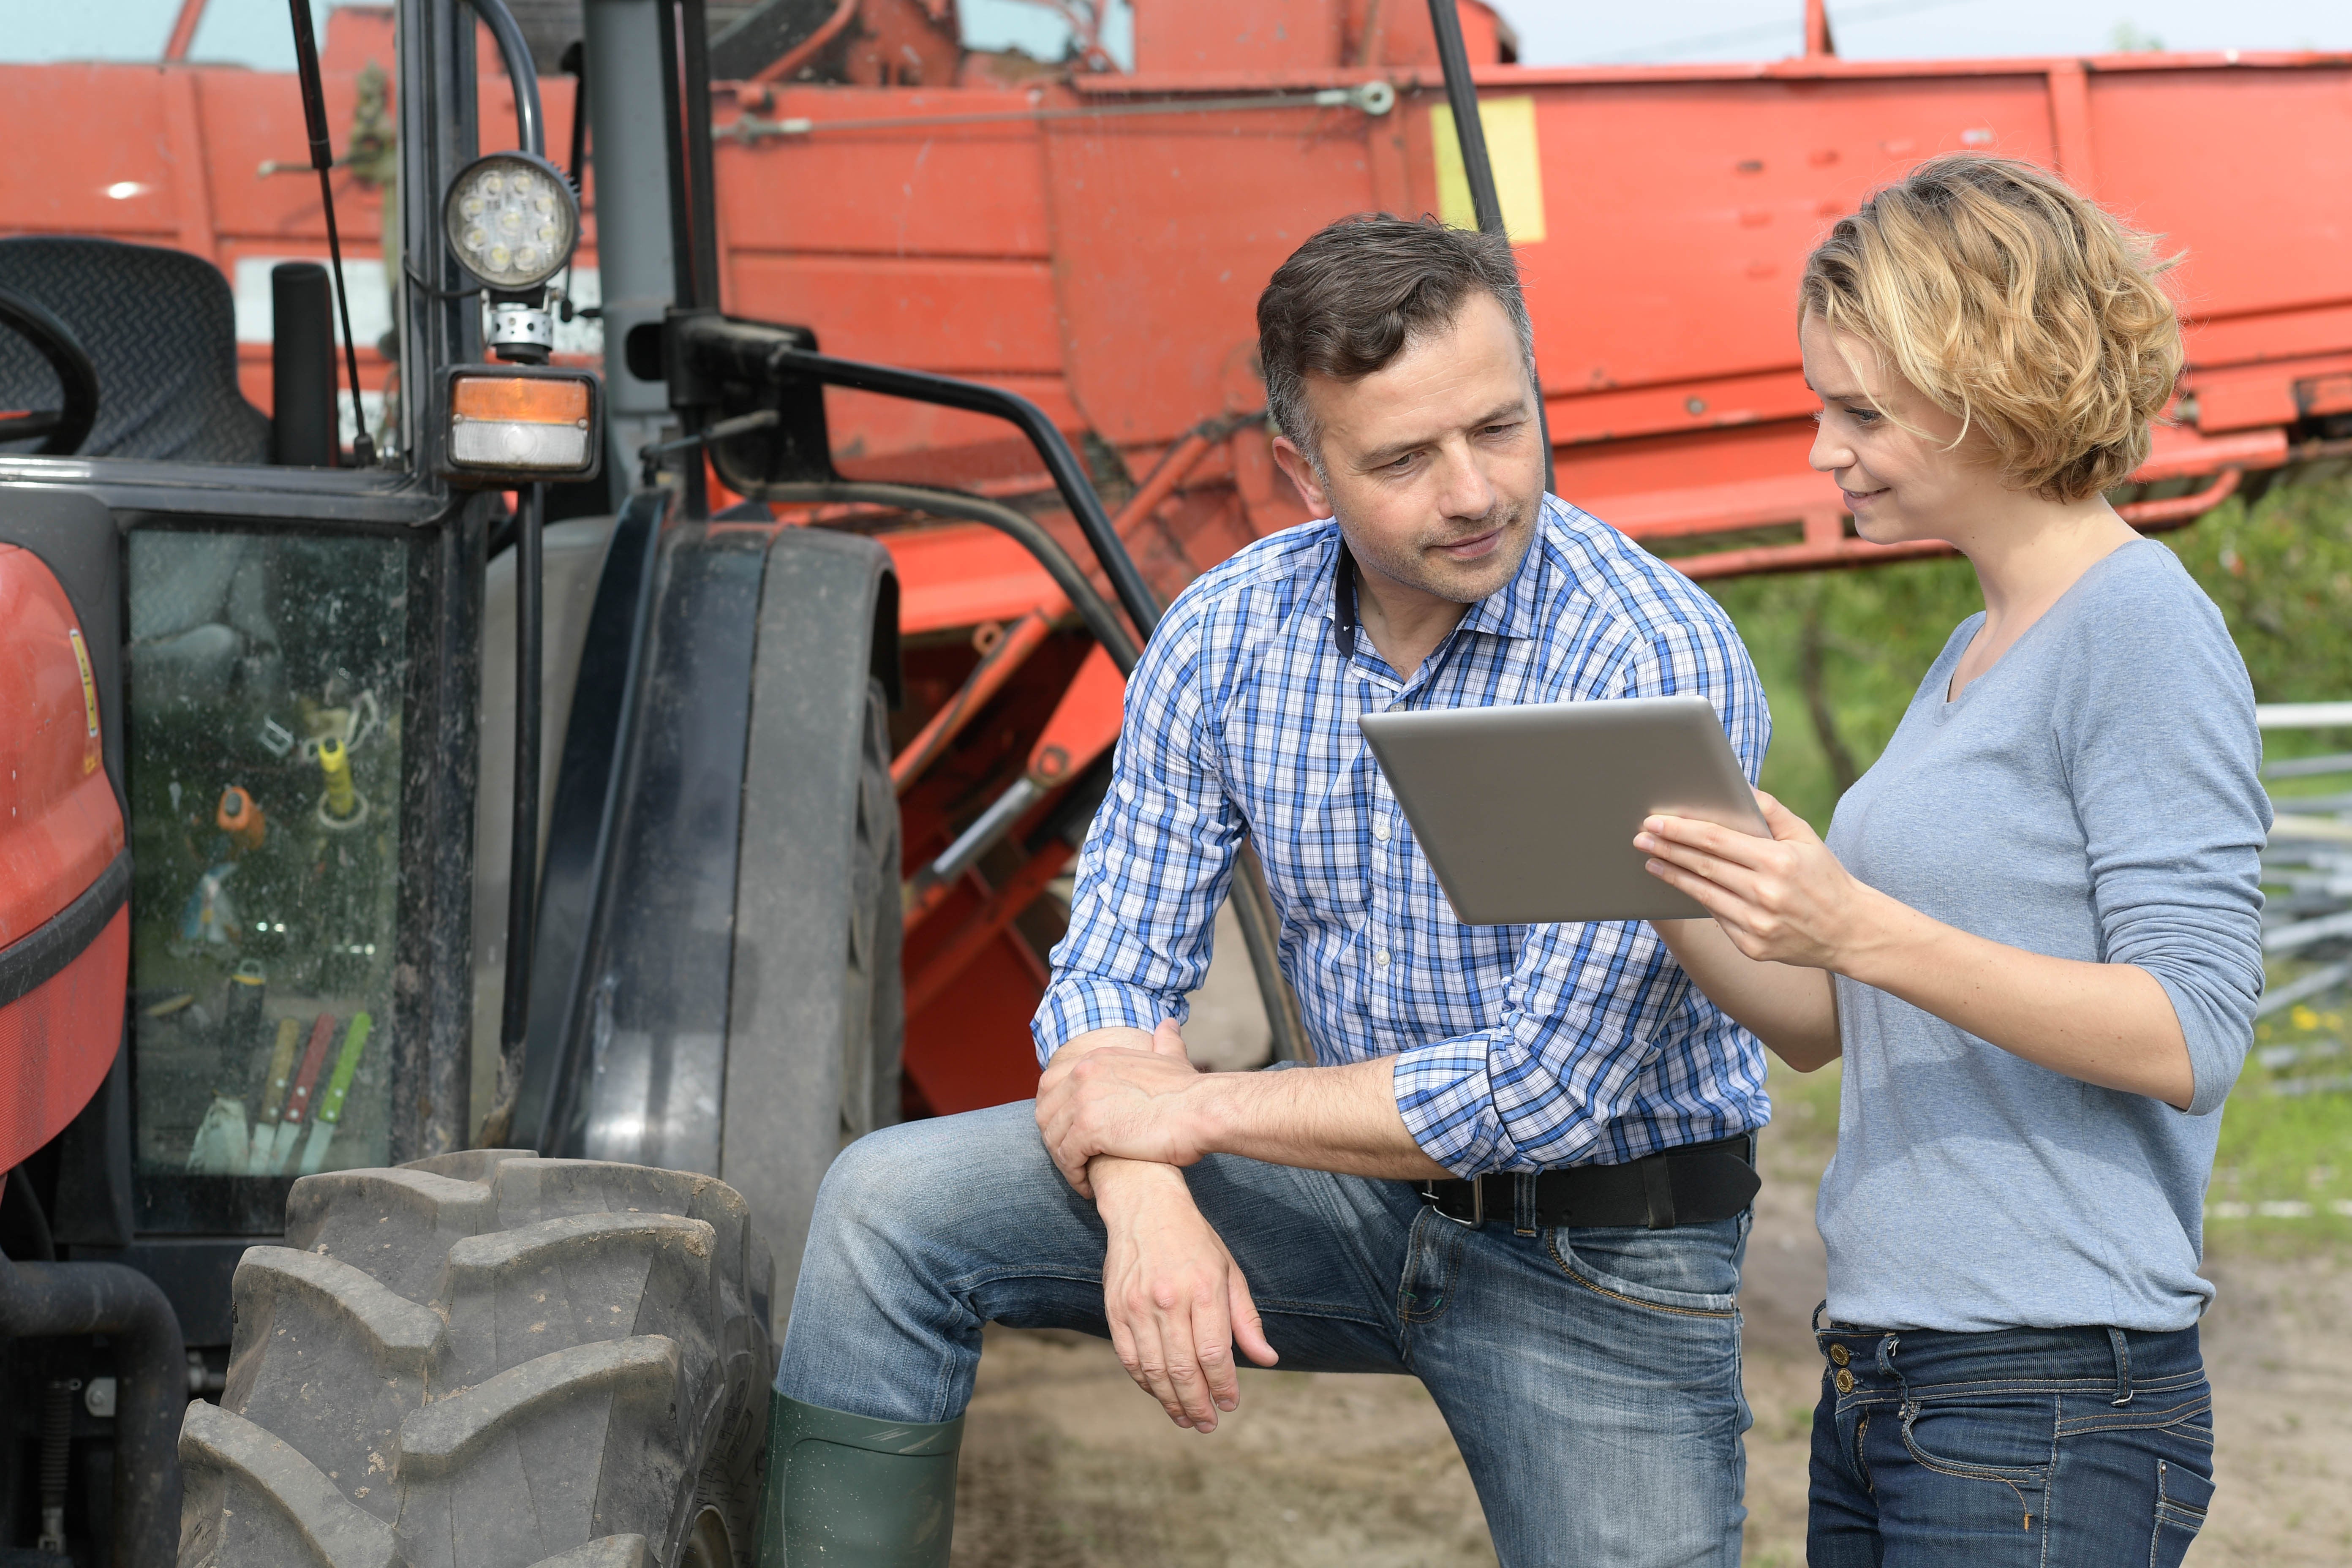 Man and woman review farm data on a tablet